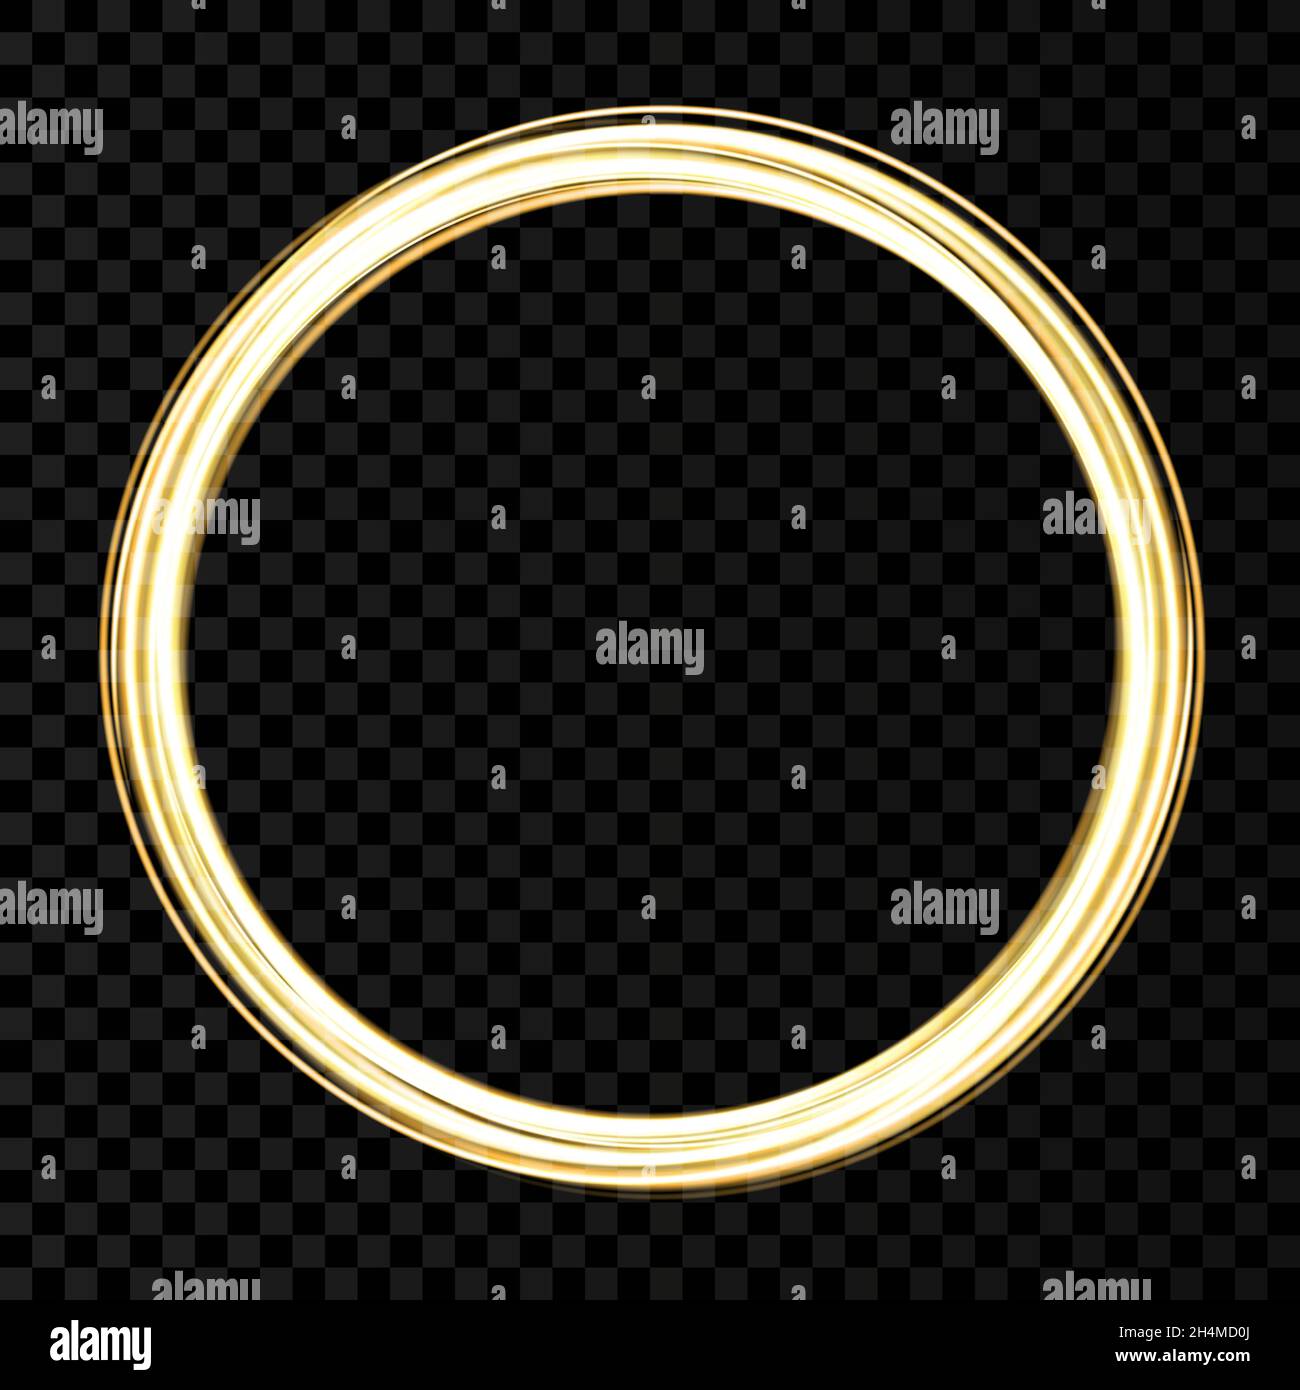 Golden round frame isolated on black background Vector Image